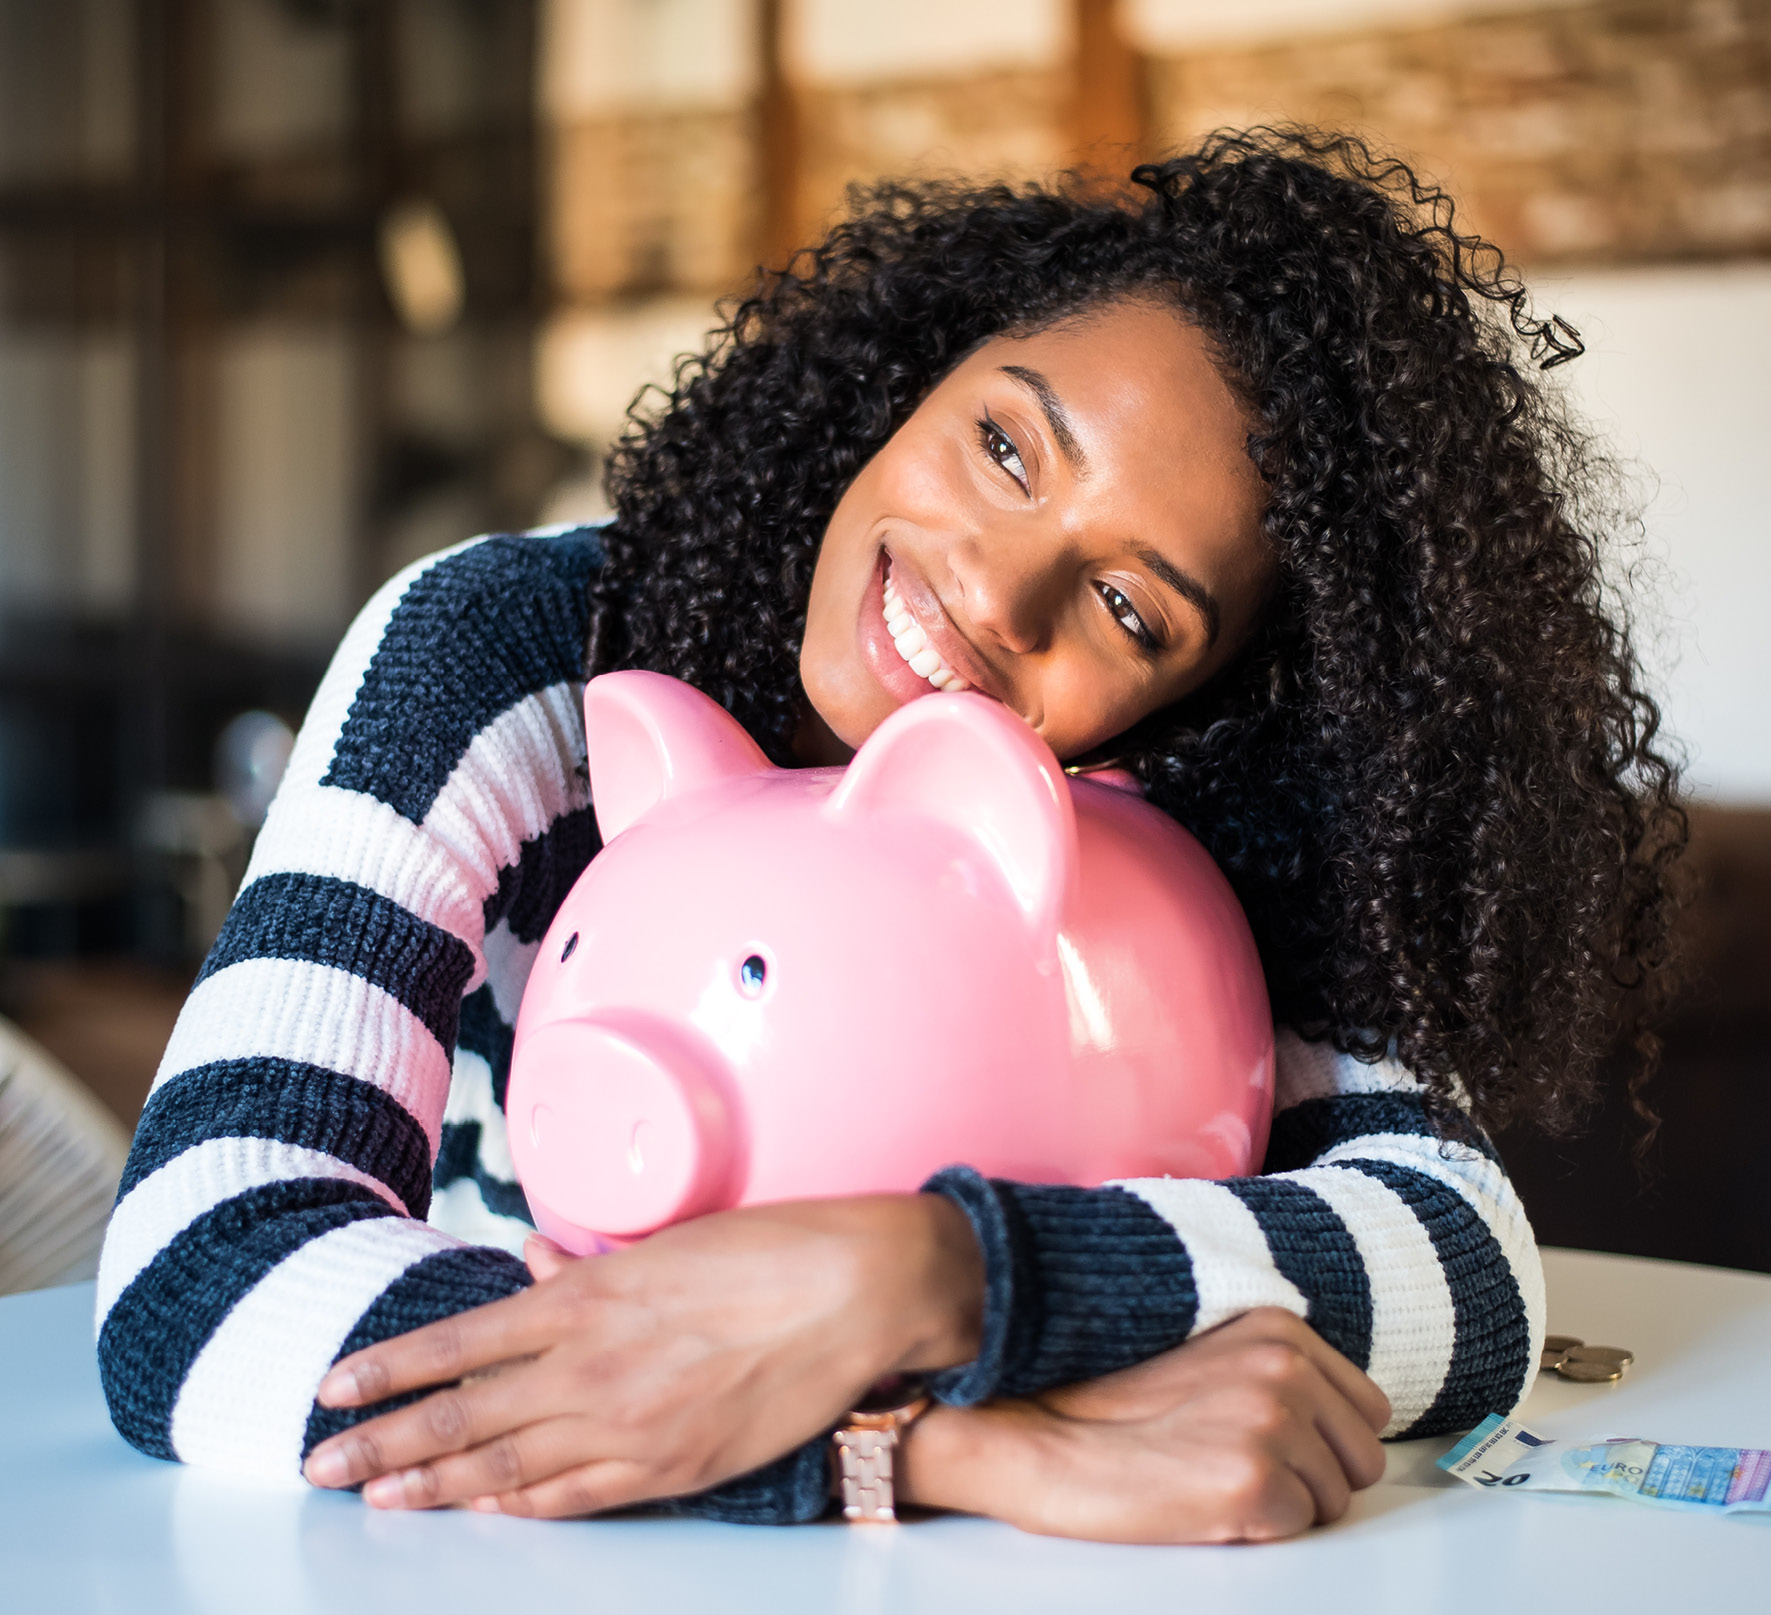 3 Financial Habits That Can Improve Your Finances